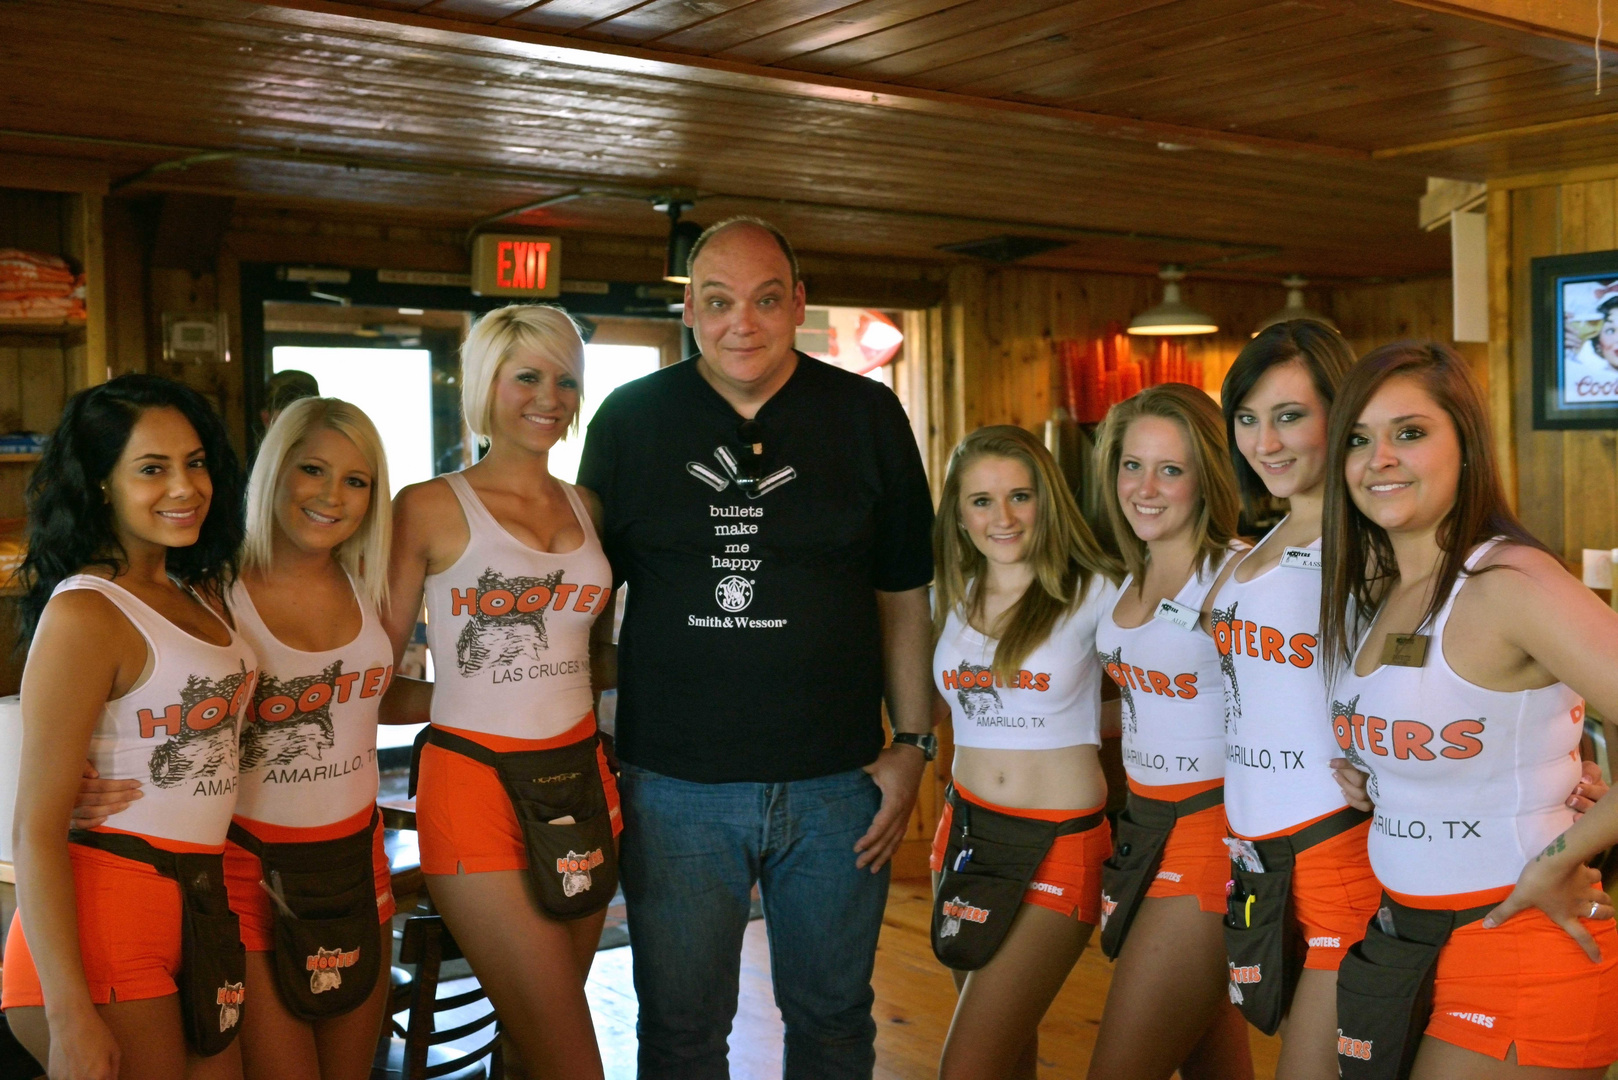 Hooters of Amarillo, TX